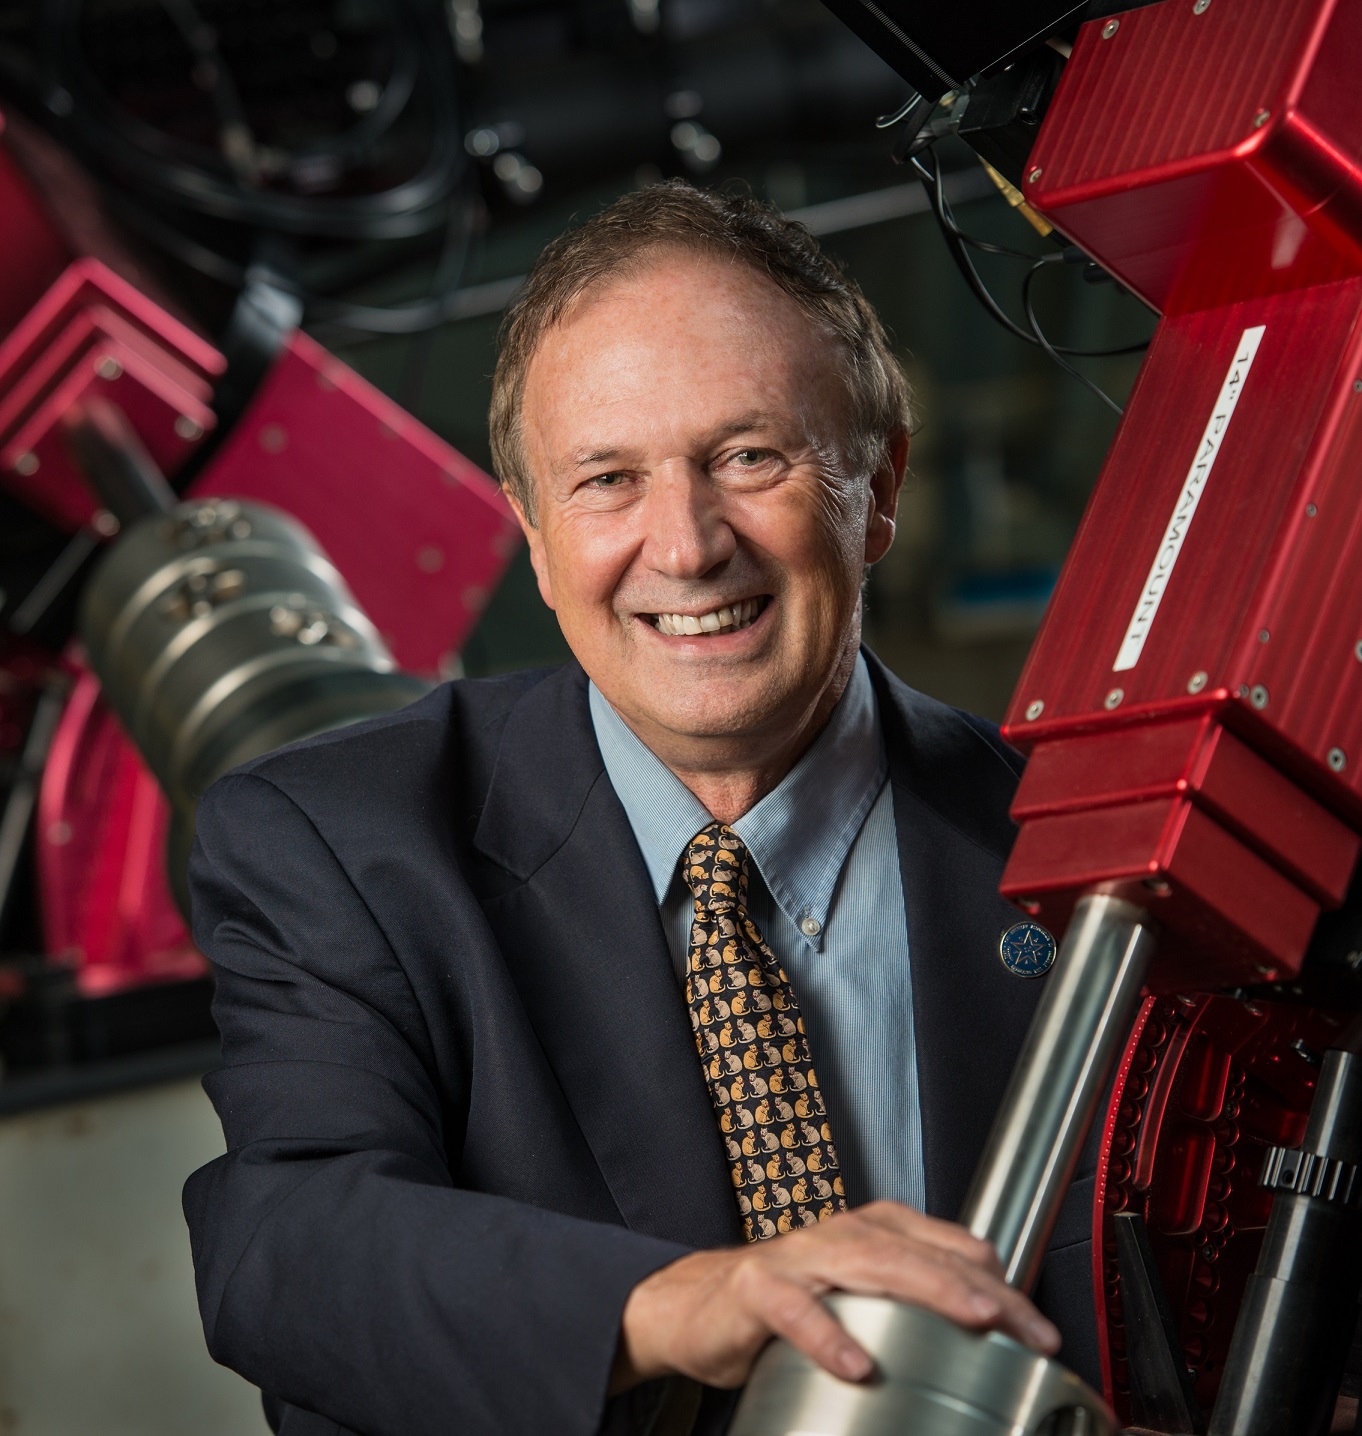 Dr. Edward Guinan, Professor of Astrophysics and Planetary Sciences